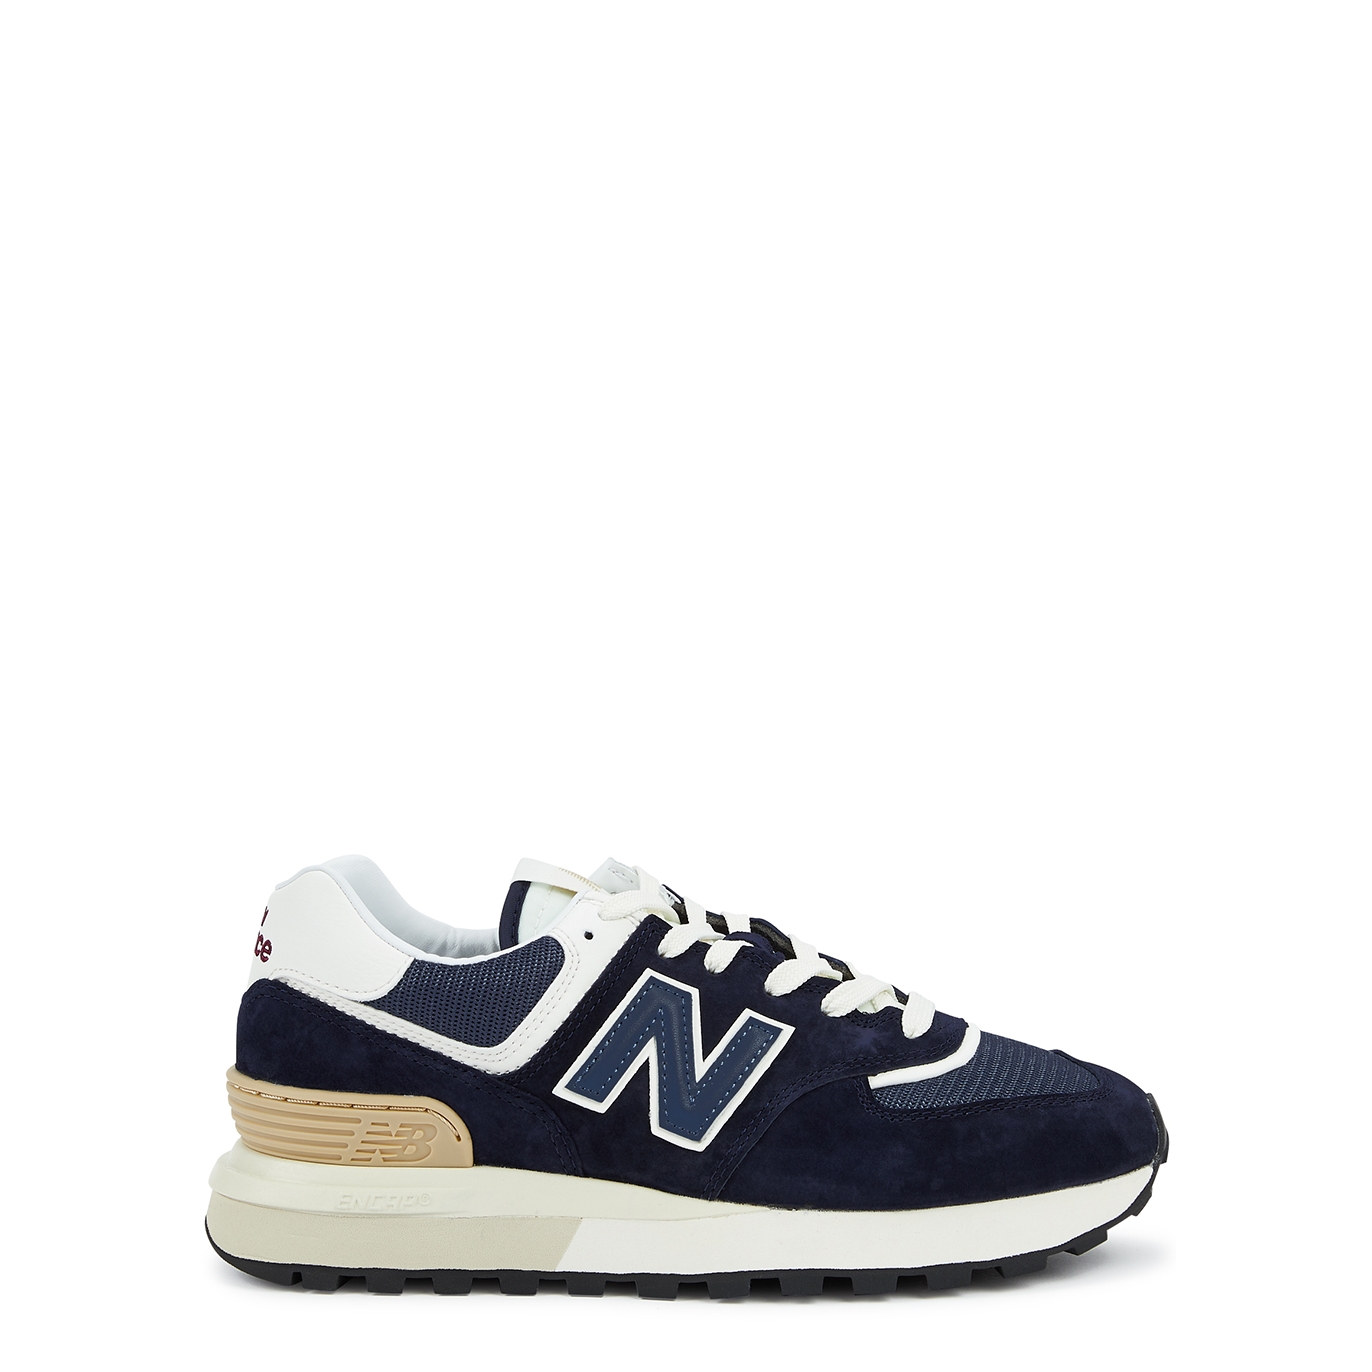 New Balance 574 Panelled Suede Sneakers - Navy - 7